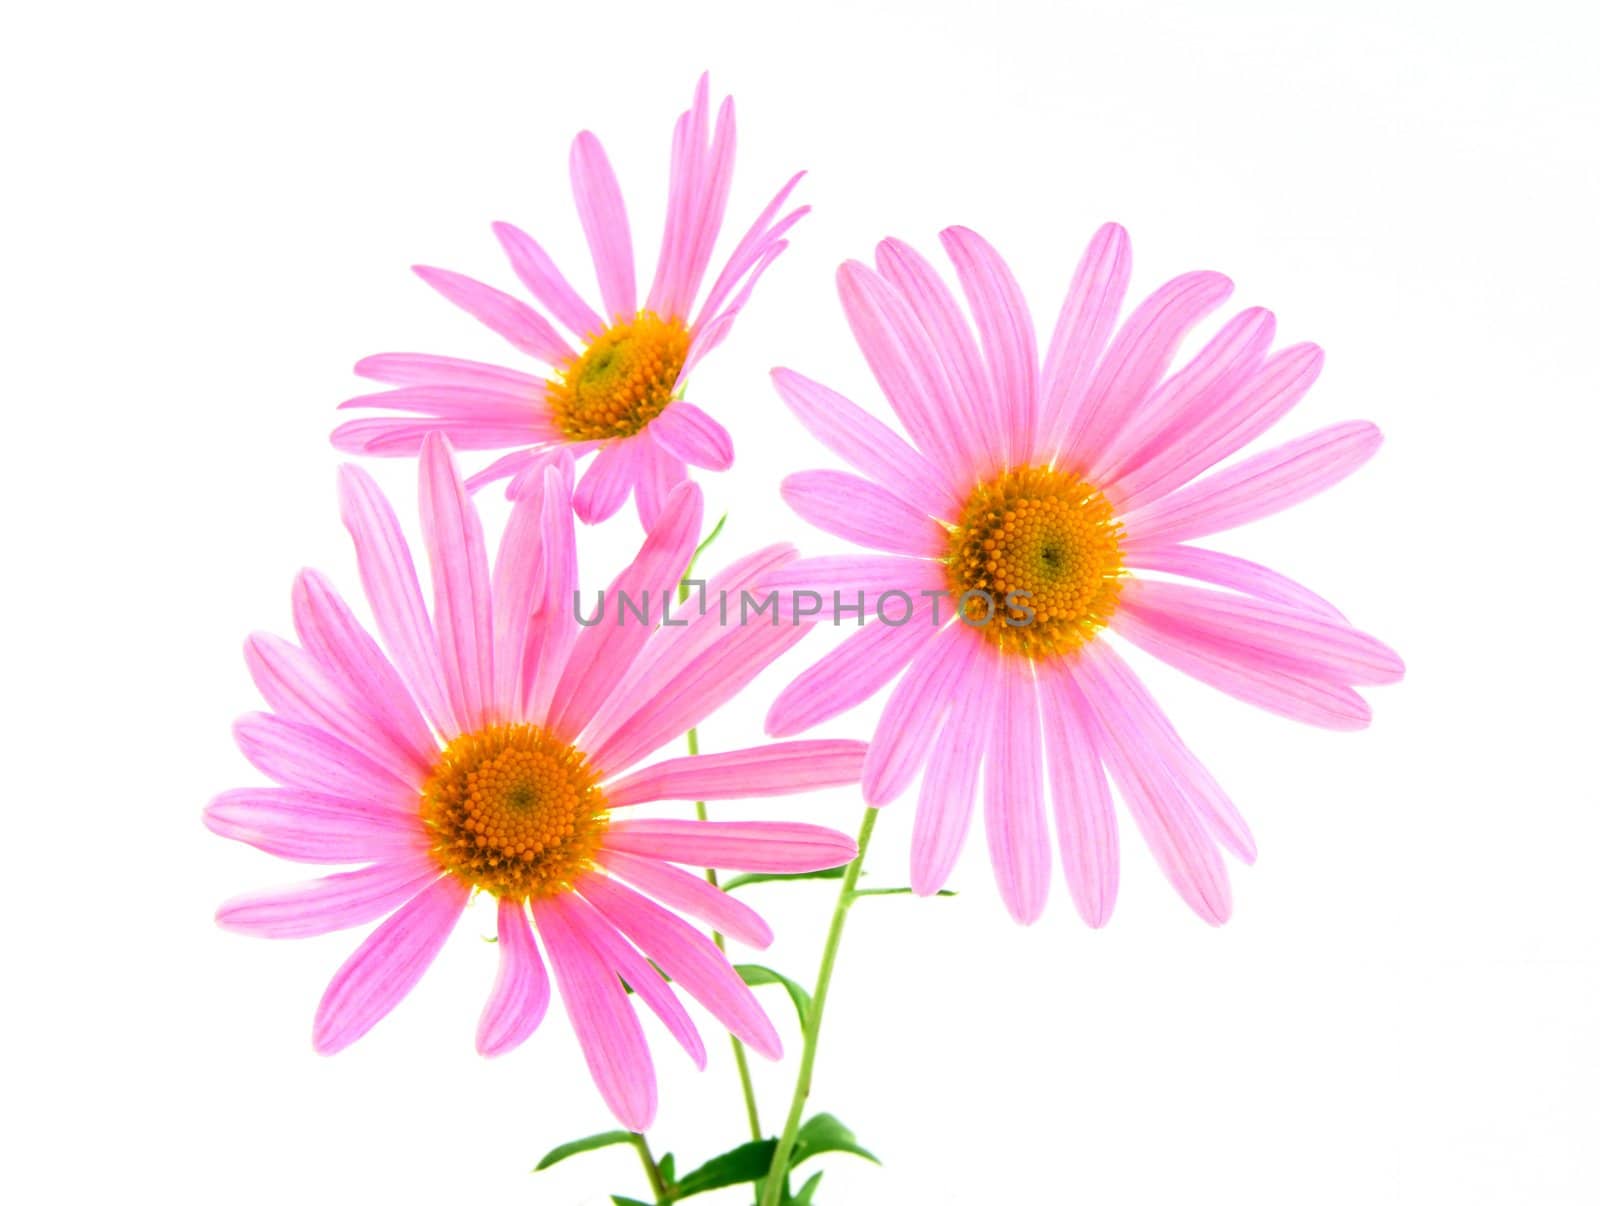 Three delicate pink gerbera daisies on white background.